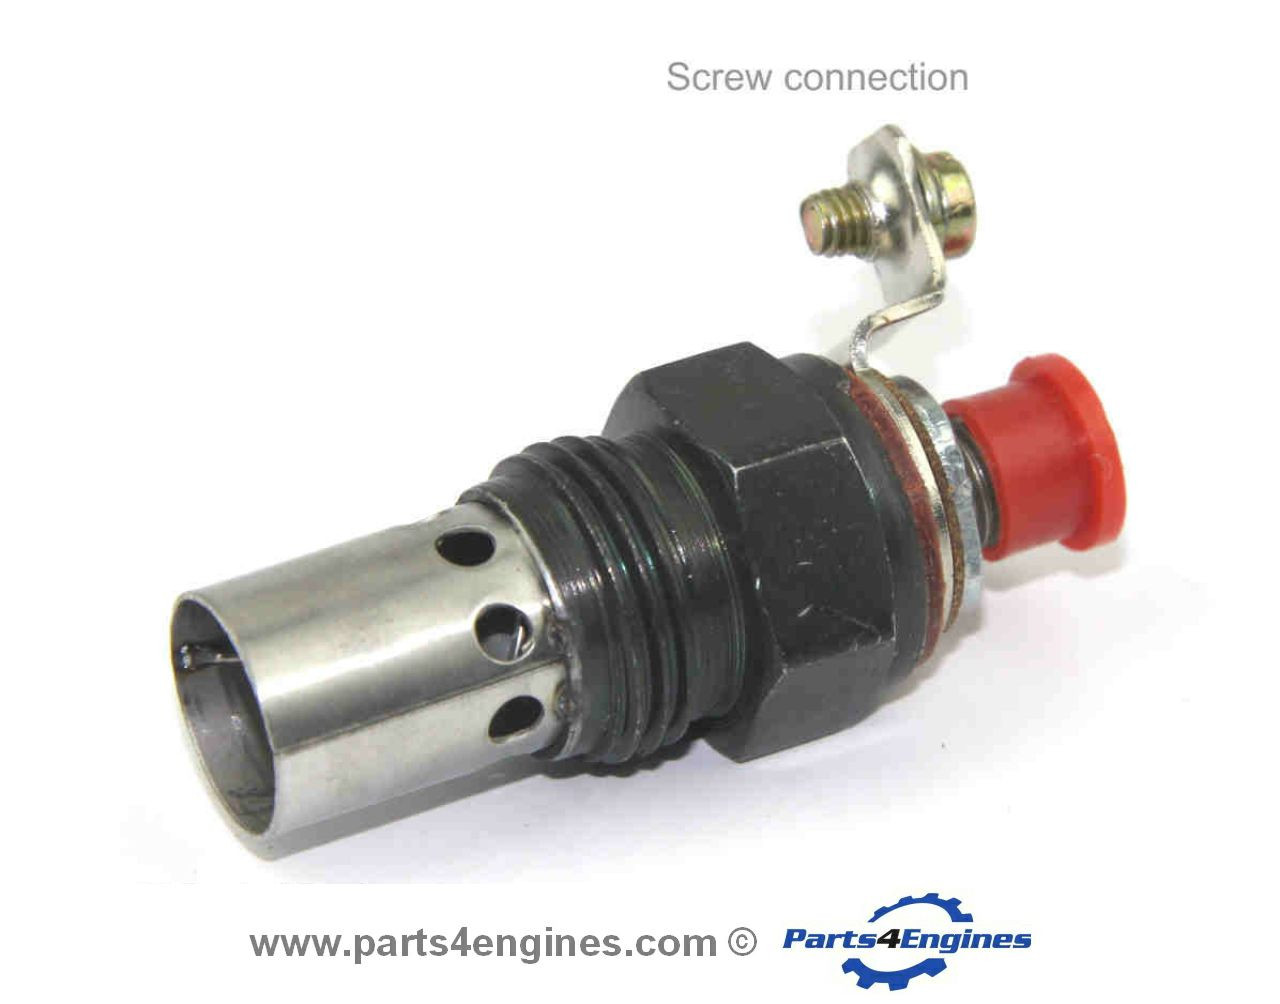 Screw connection: Perkins 4.99 Glowplug Thermostart from Parts4engines.com